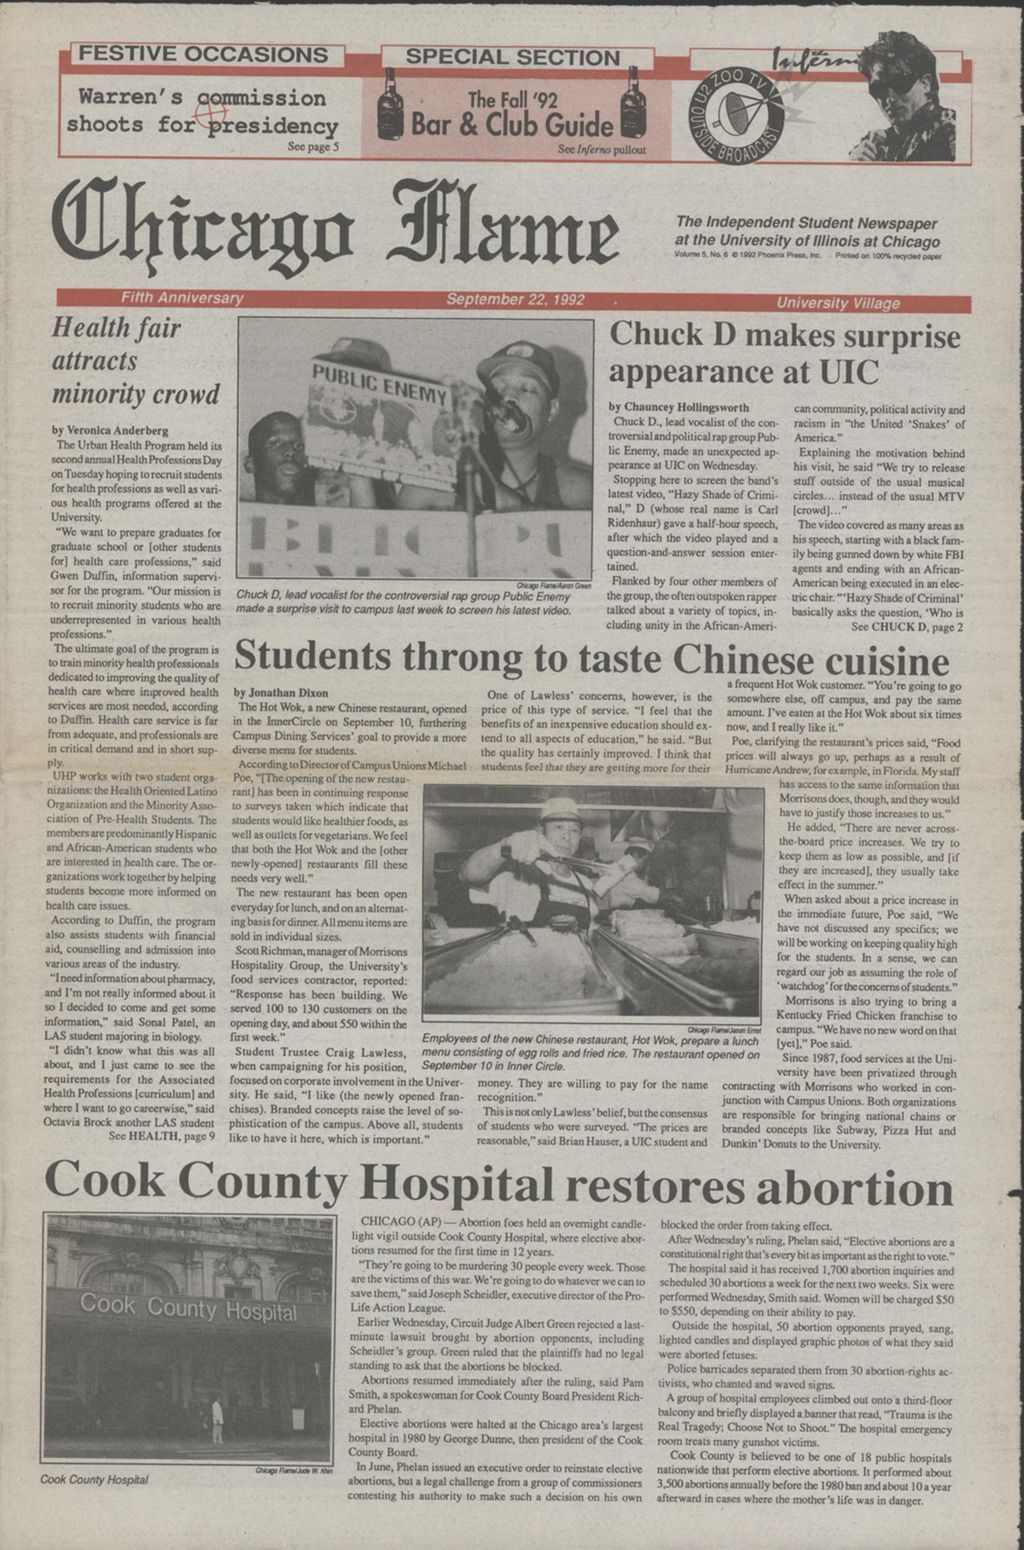 Miniature of Chicago Flame (September 22, 1992)